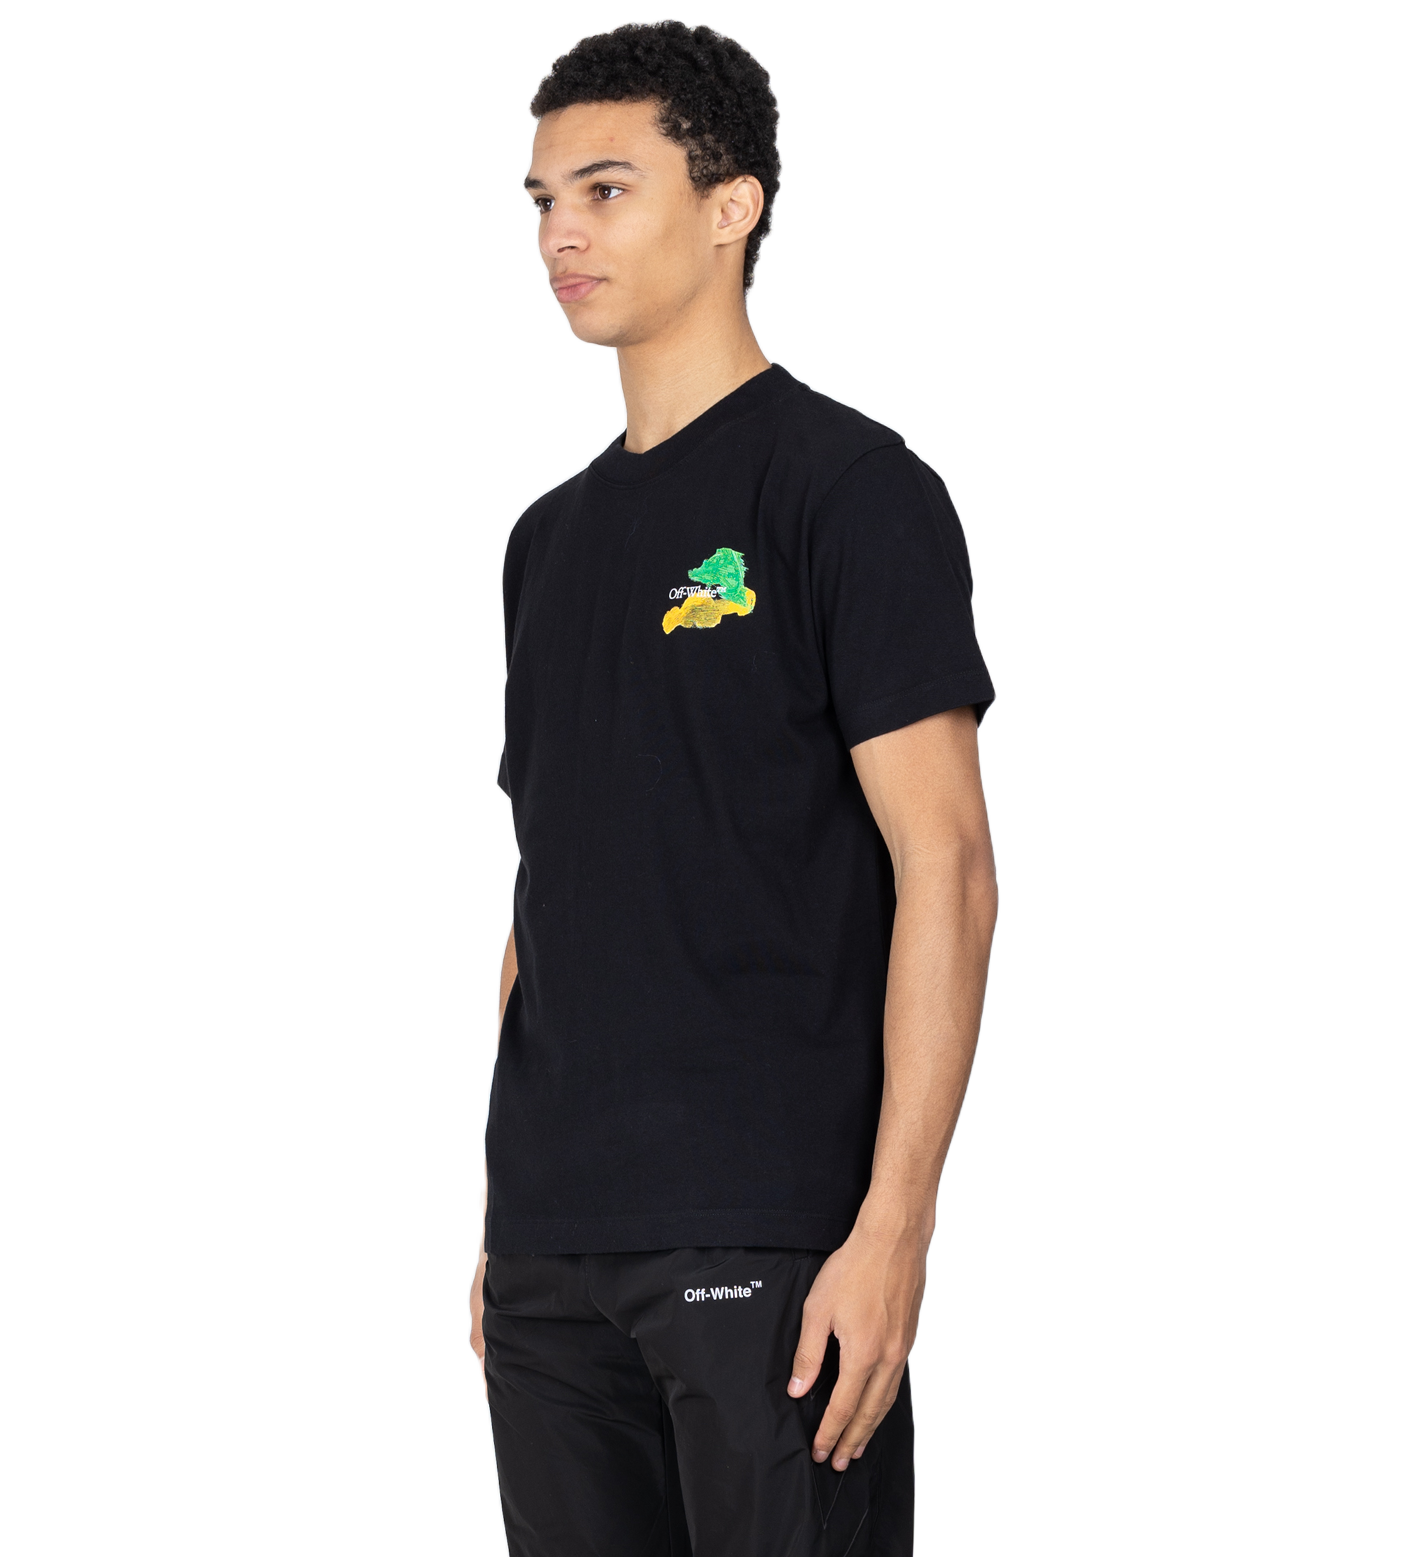 off-white brushed arrows shirt black | patisserie-cle.com